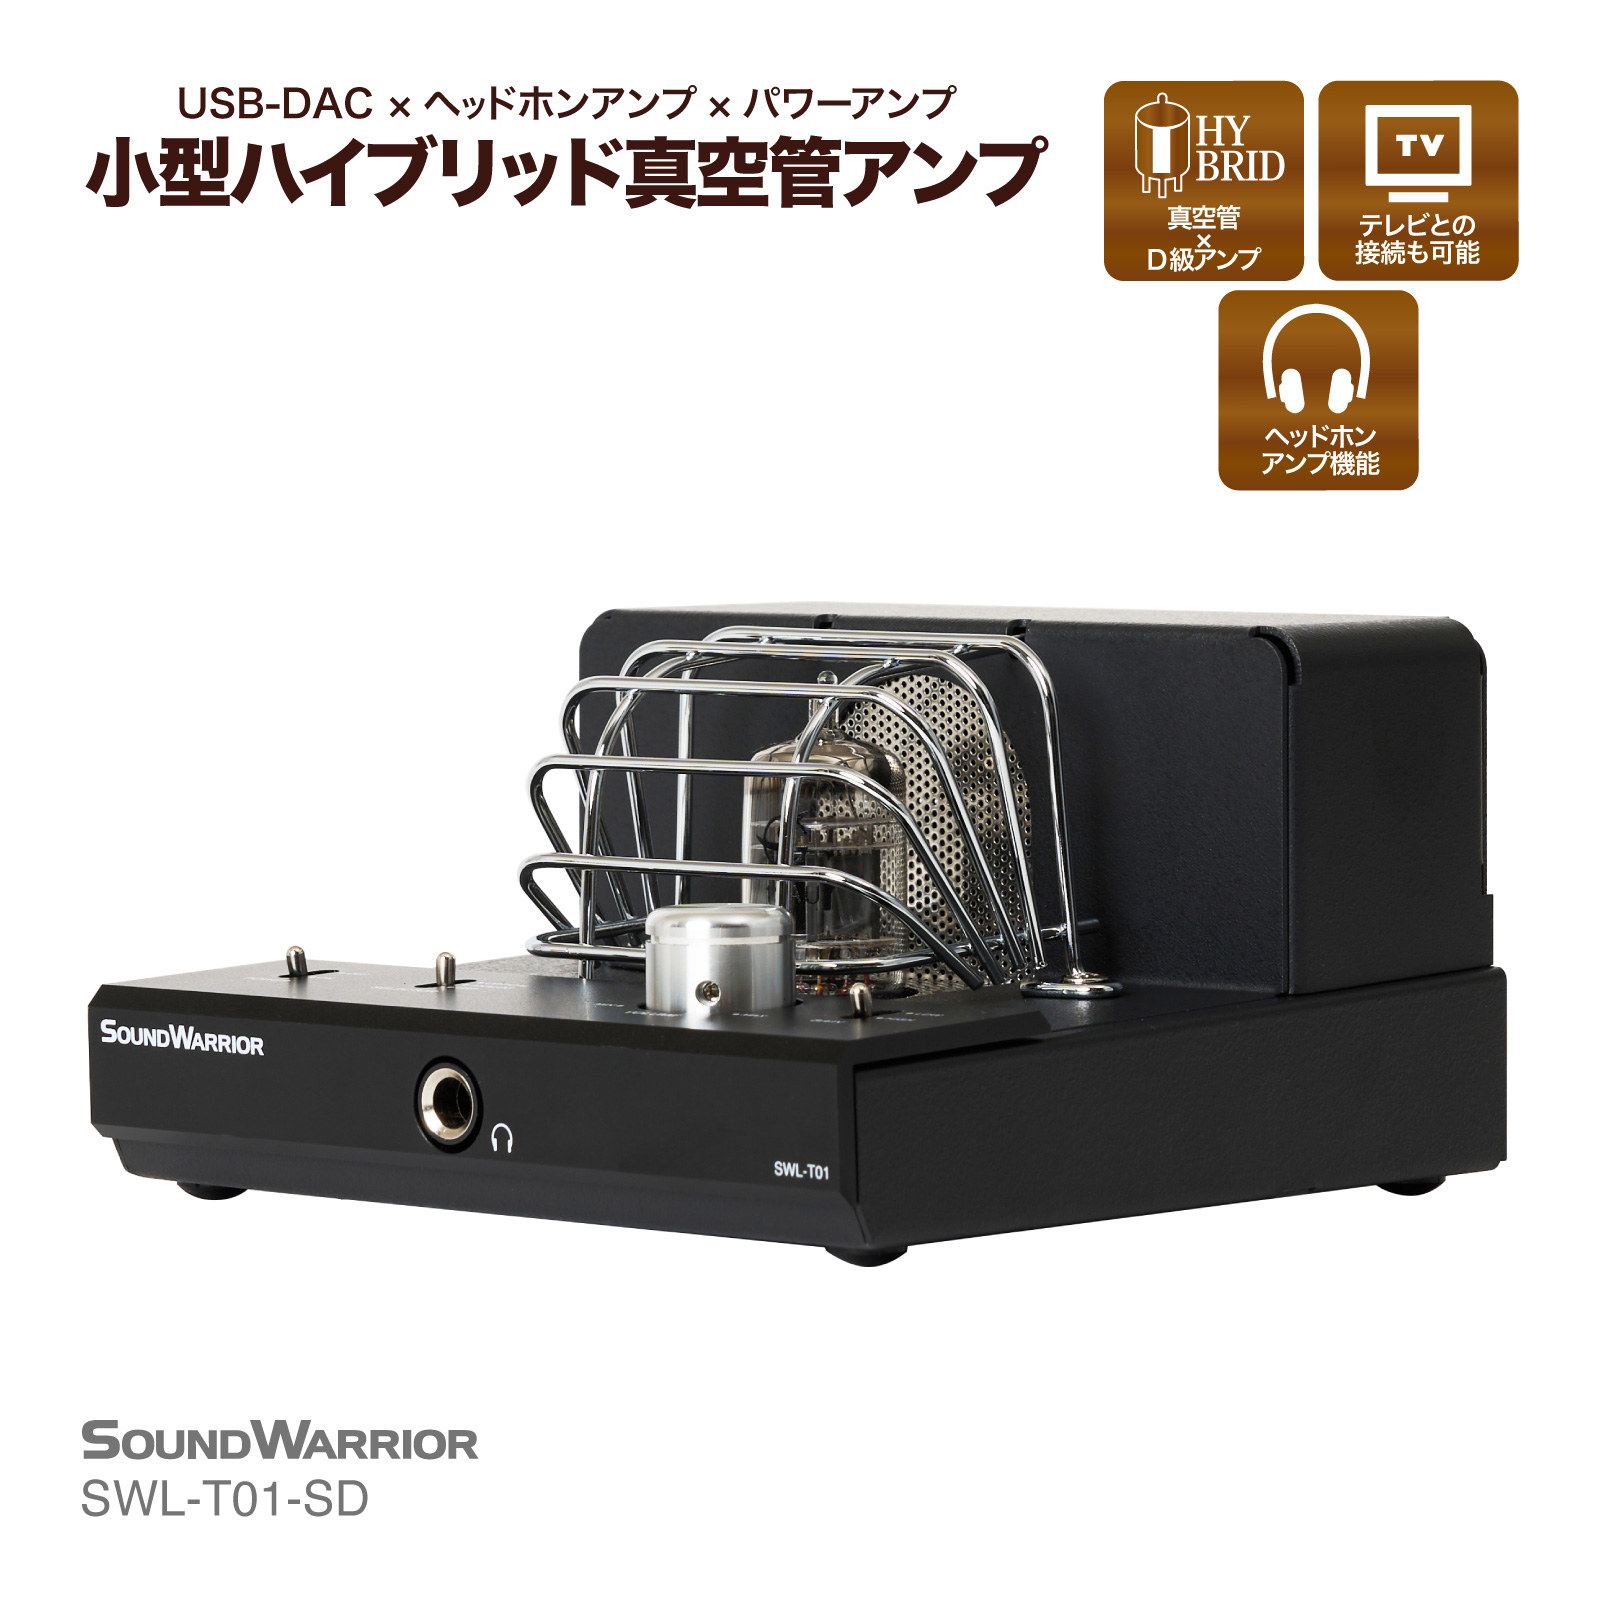 SWL-T01-SD small size hybrid tube amplifier | pre-main amplifier headphone amplifier power amplifier made in Japan D class amplifier 